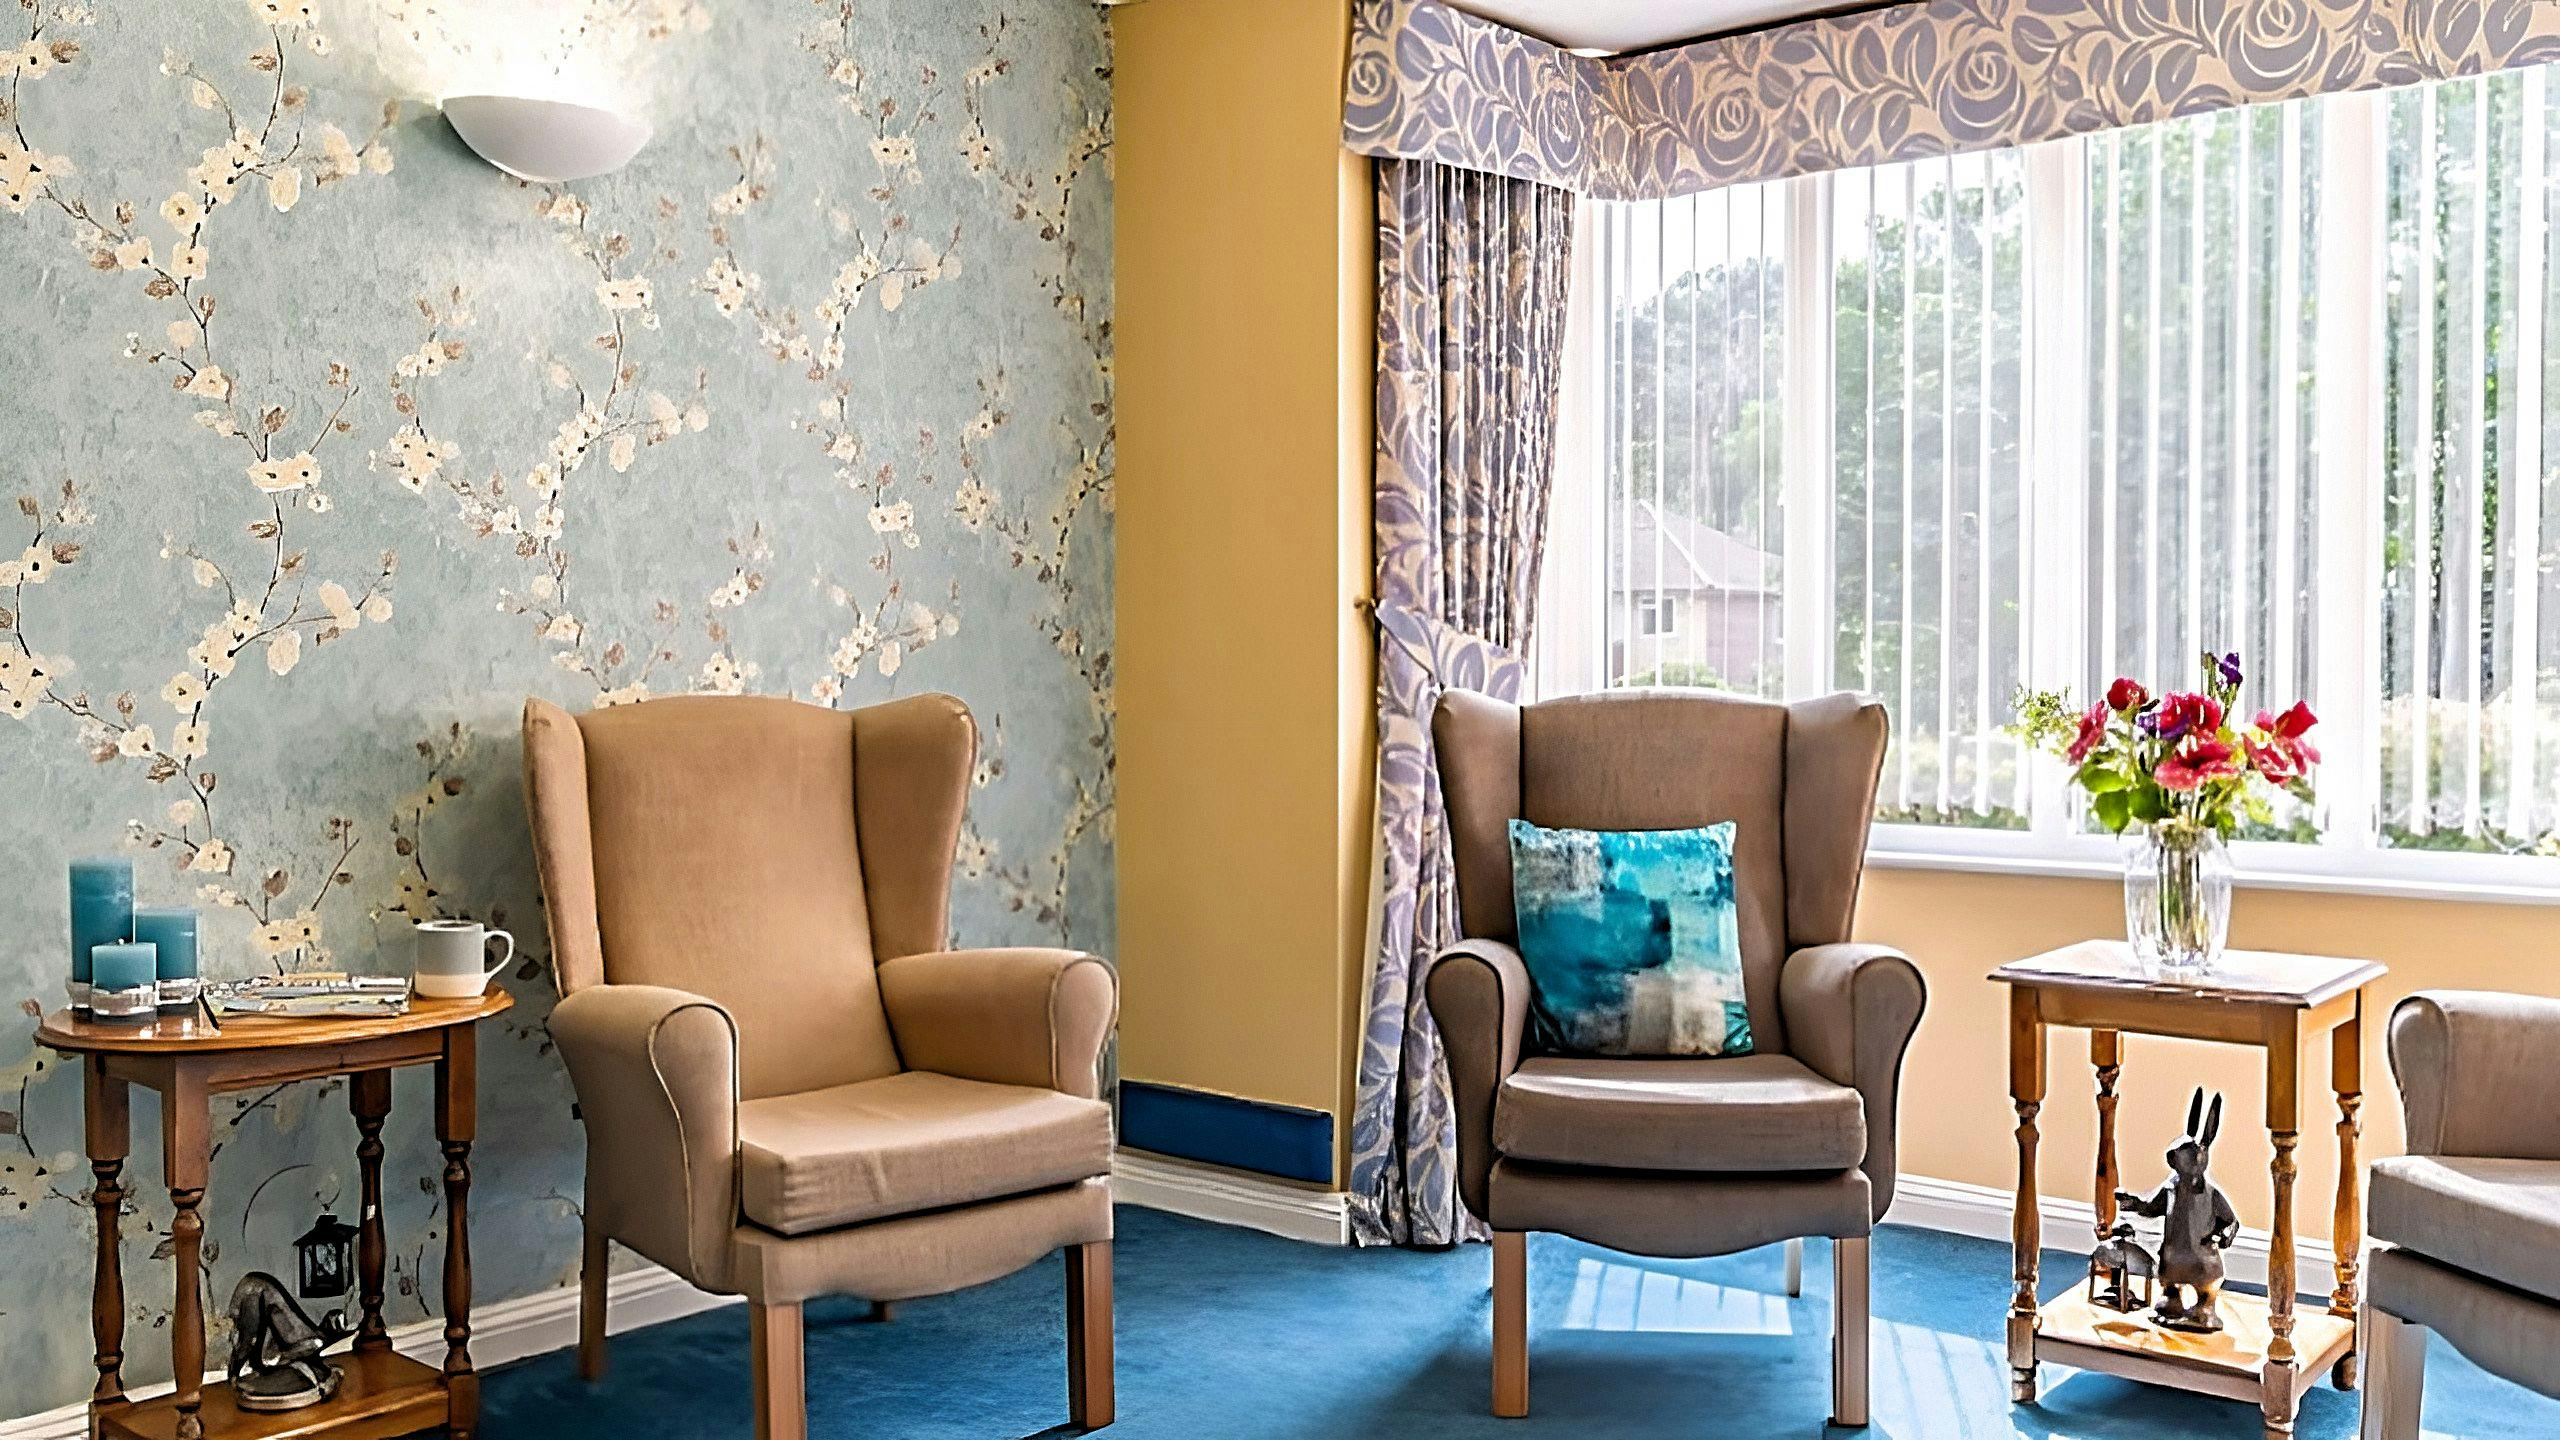 Countrywide - Dussindale Park care home 7